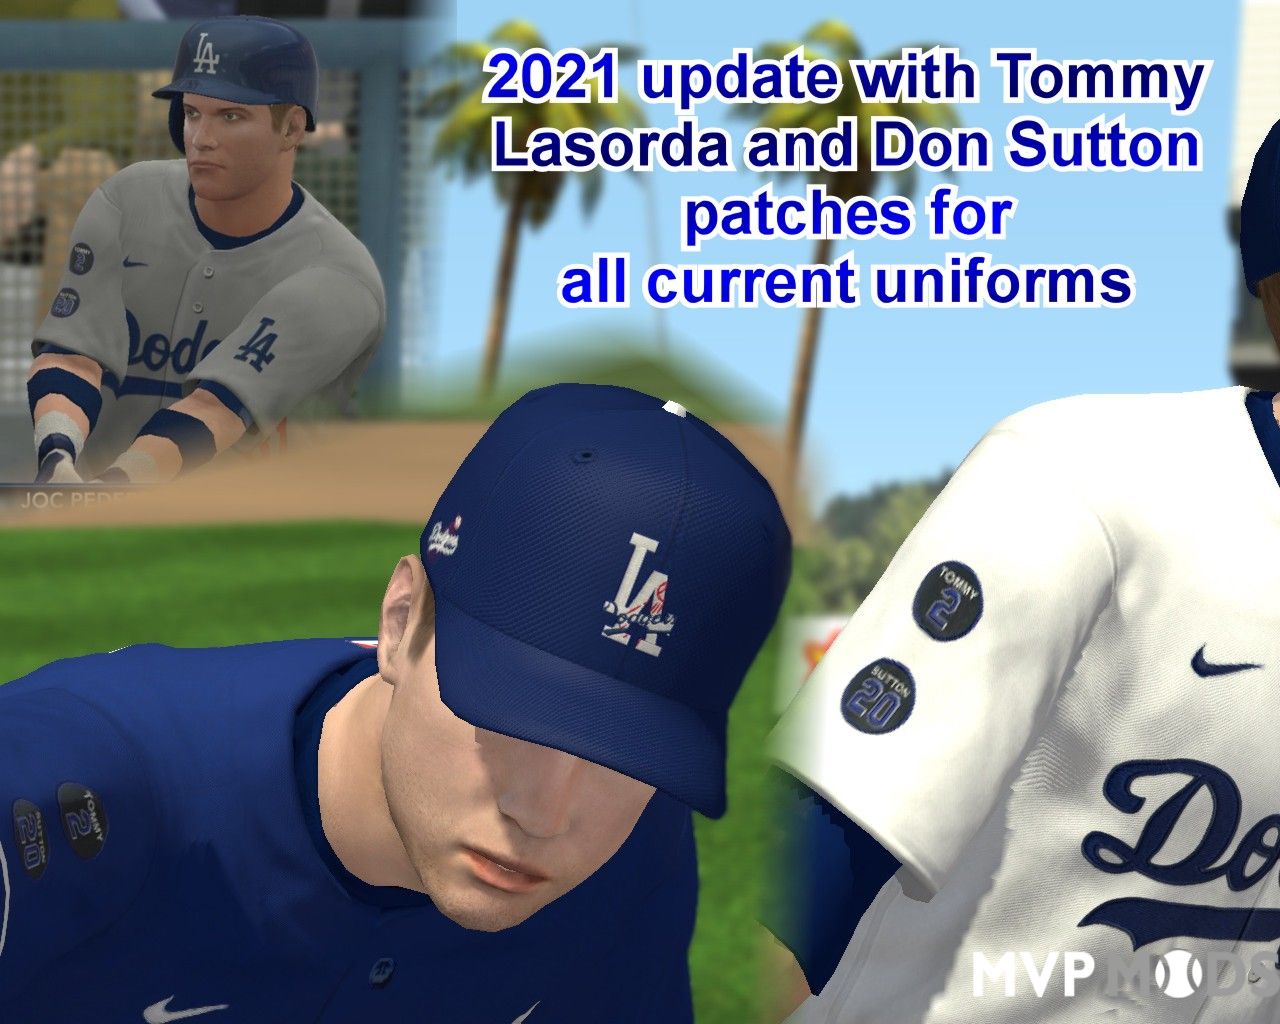 Los Angeles Dodgers Road Jersey Sony PlayStation Skin